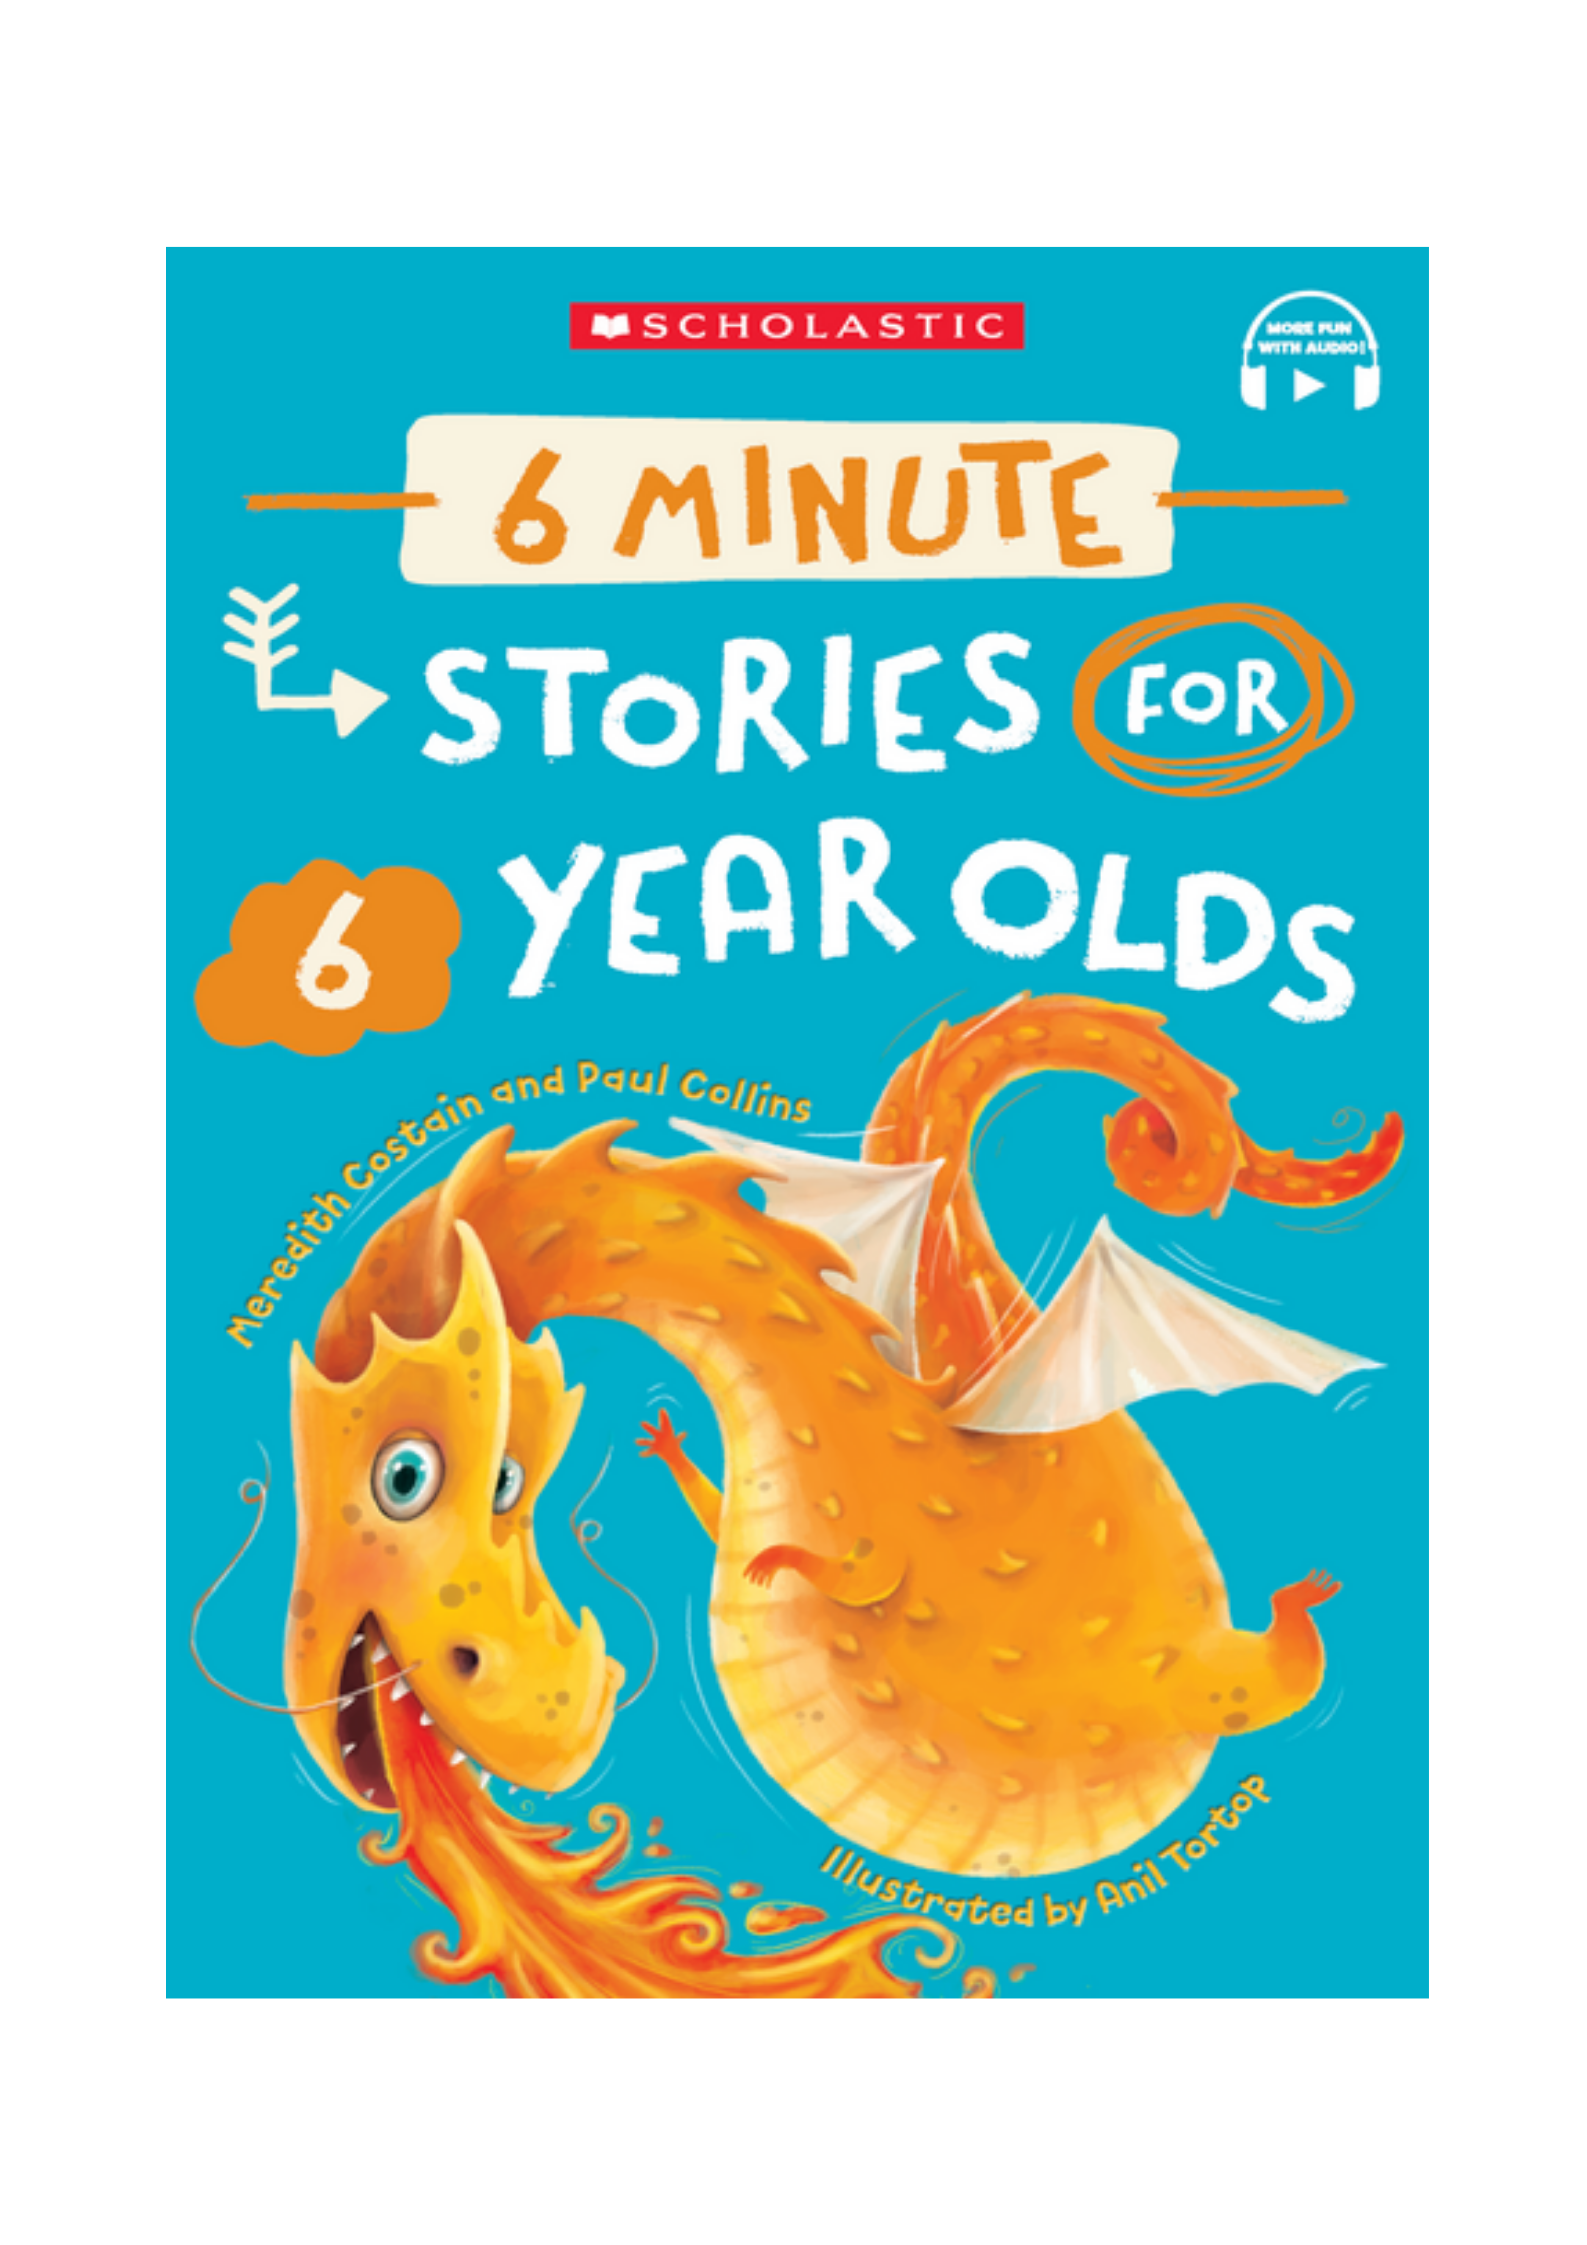 Six Minute Stories for 6 Year Olds